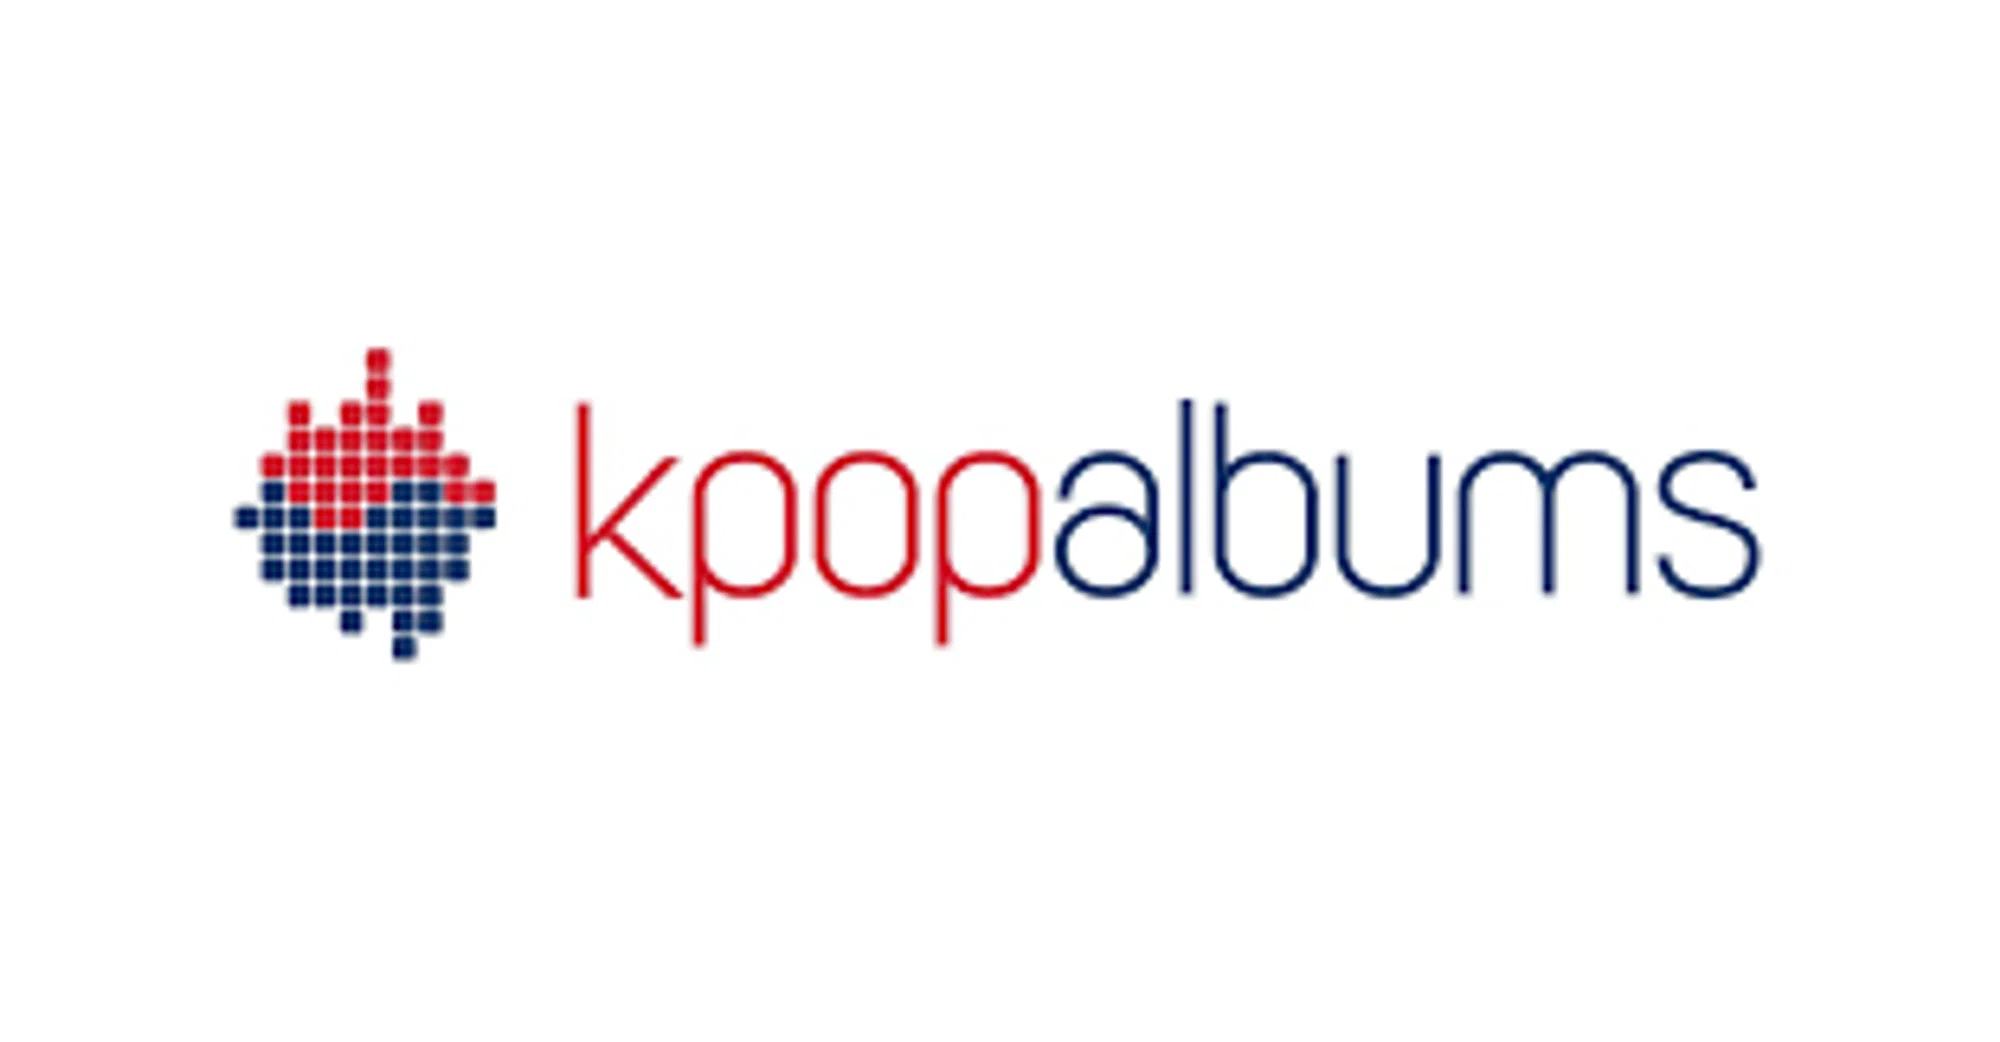 Kpopalbums